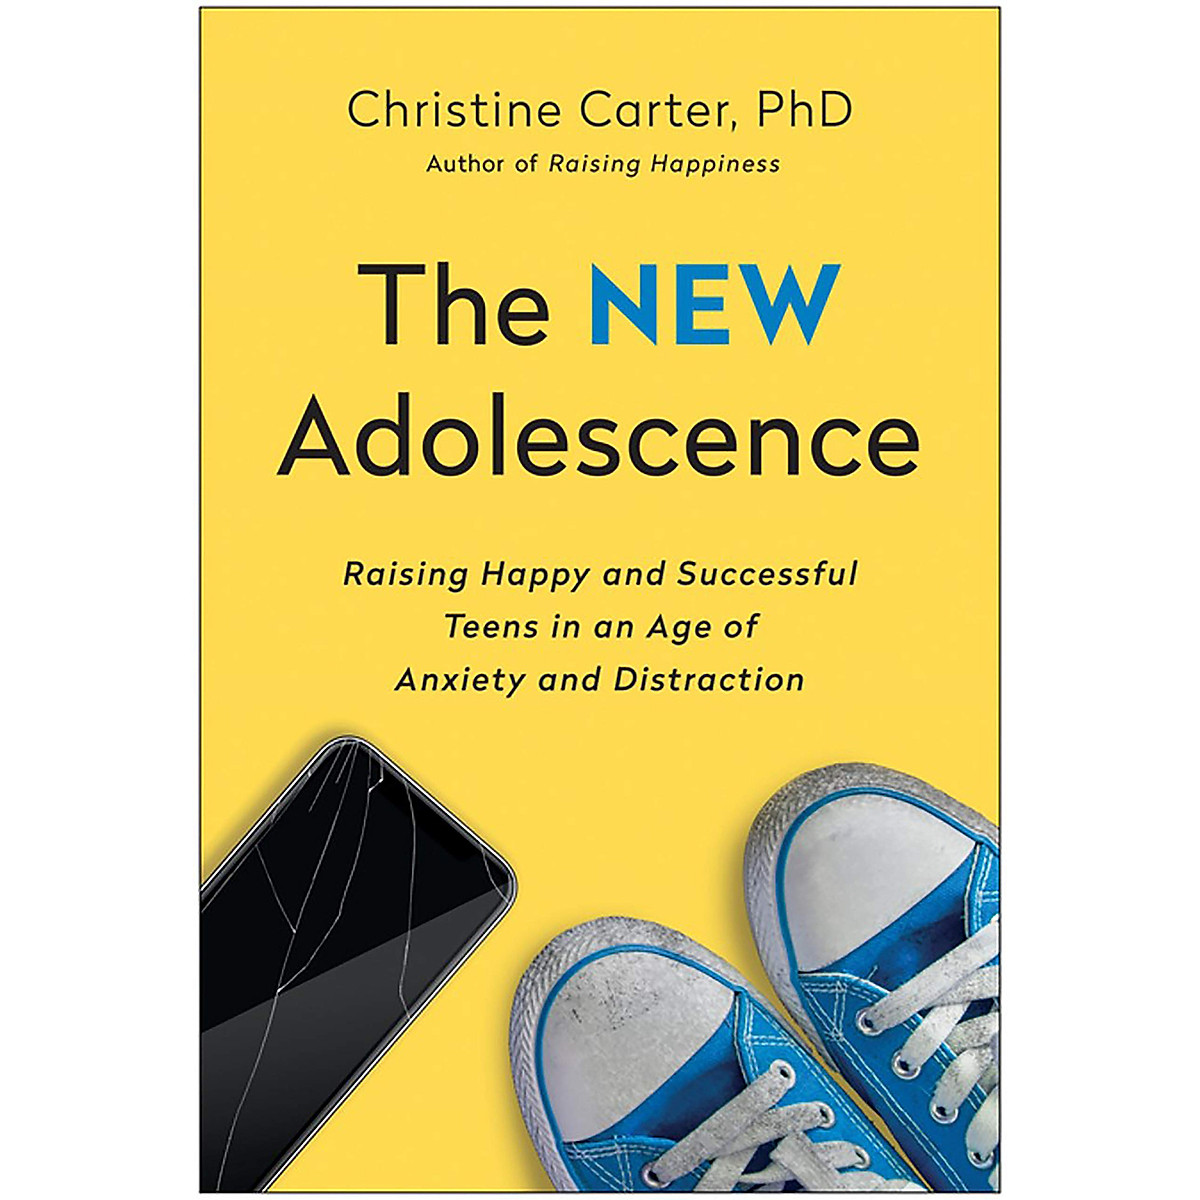 The New Adolescence: Raising Happy and Successful Teens in an Age of Anxiety and Distraction